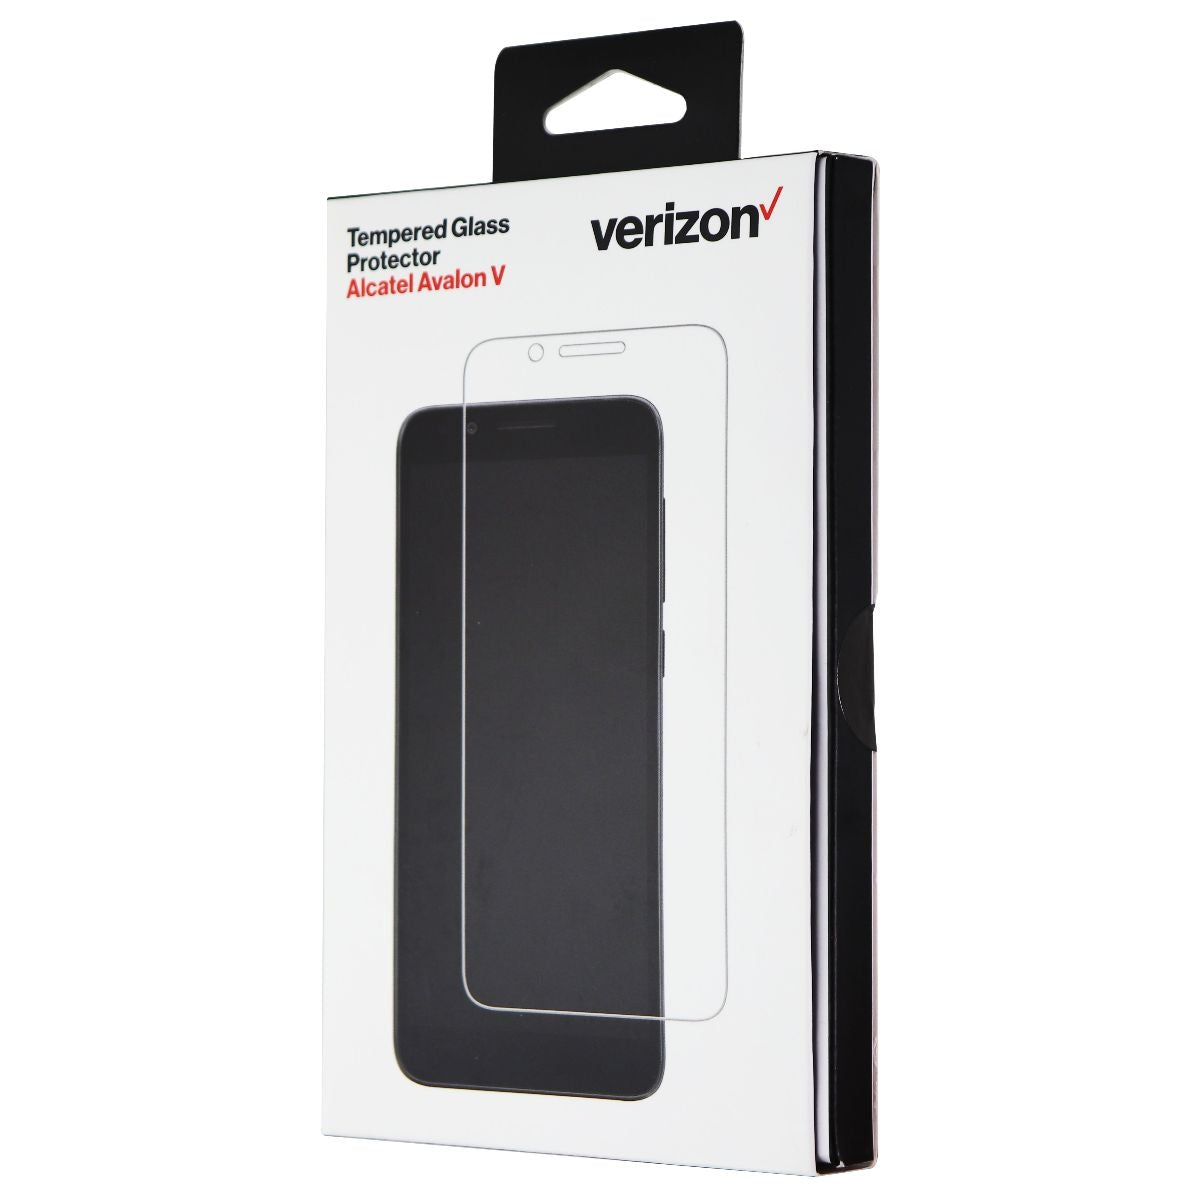 Verizon Tempered Glass Screen Display Protector for Alcatel Avalon V - Clear Cell Phone - Screen Protectors Verizon    - Simple Cell Bulk Wholesale Pricing - USA Seller